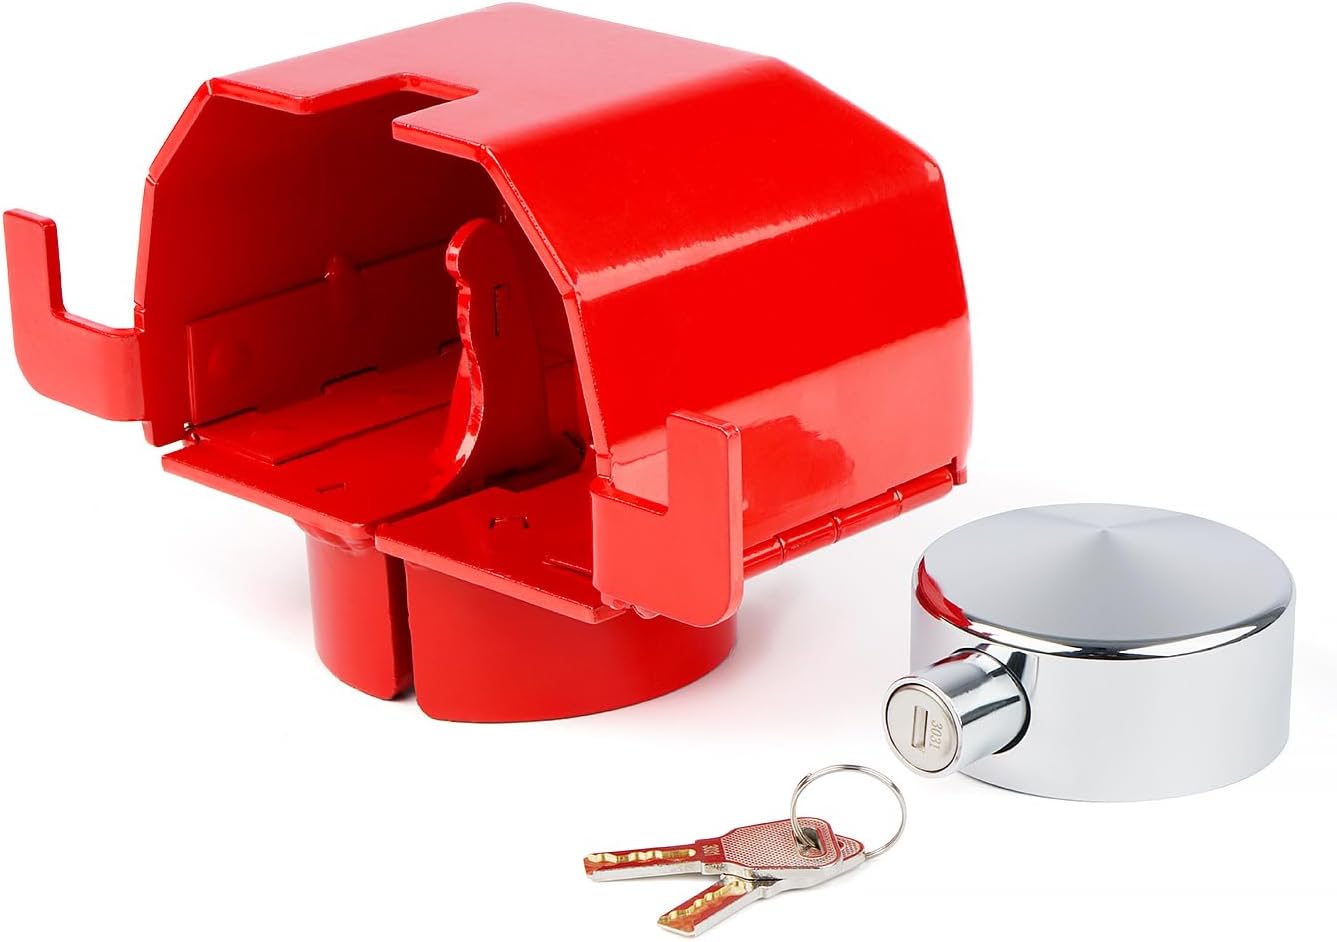 Red Anti-Theft, Heavy-Duty Steel Trailer Hitch Lock for 
2 5/16-Inch Coupler